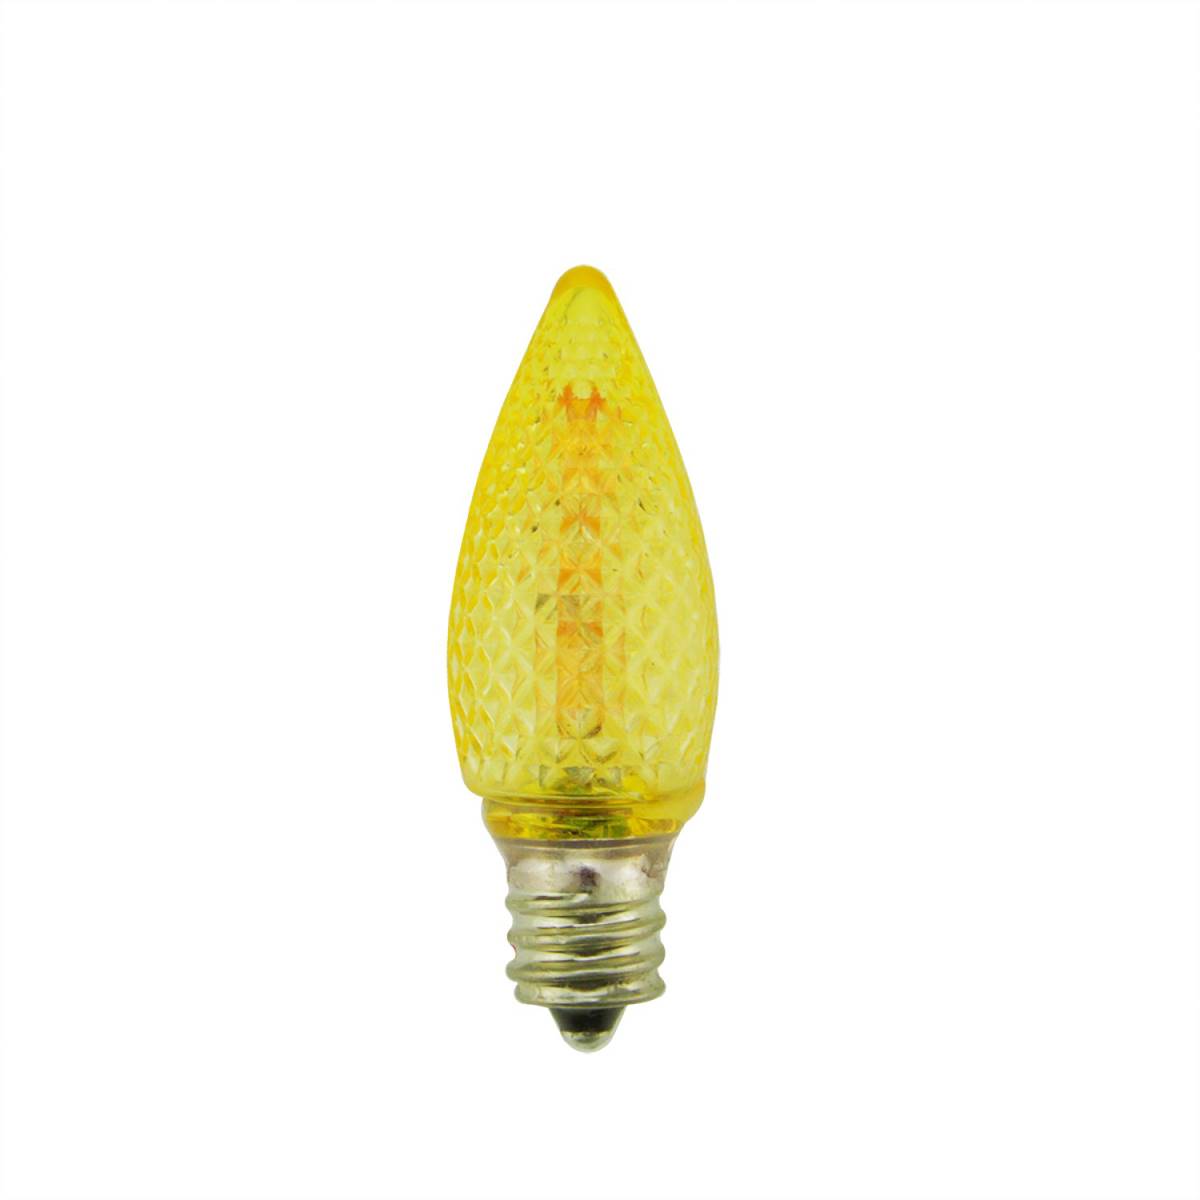 Sienna 4pk. C7 Amber Faceted Christmas Replacement Bulbs